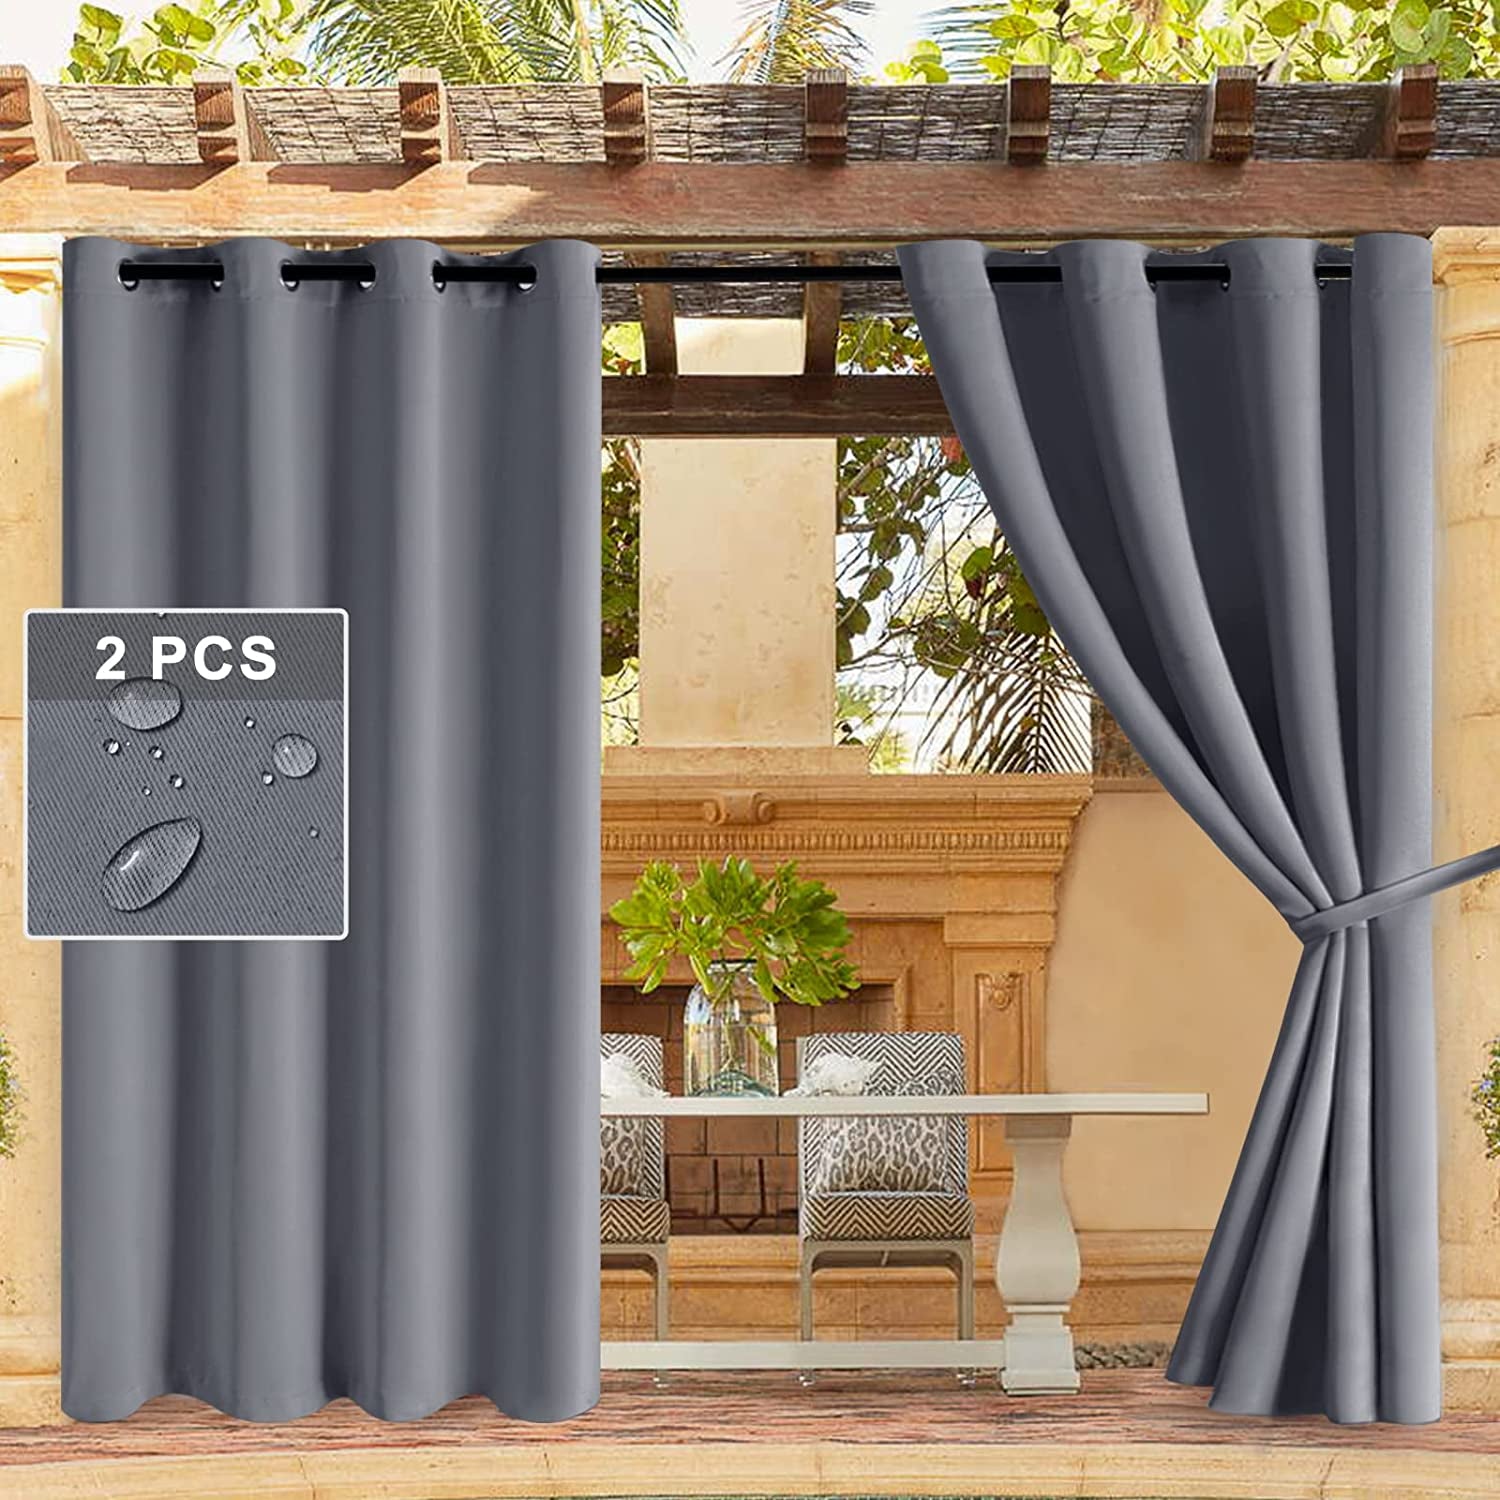 DWCN, DWCN Waterproof Outdoor Curtains for Patio -Indoor Outdoor Thermal Insulated, Sun Blocking Grommet Blackout Curtains for Bedroom, Pergola ,Porch and Cabana, Grey, 52 X 84 Inches Long, 2 Panels